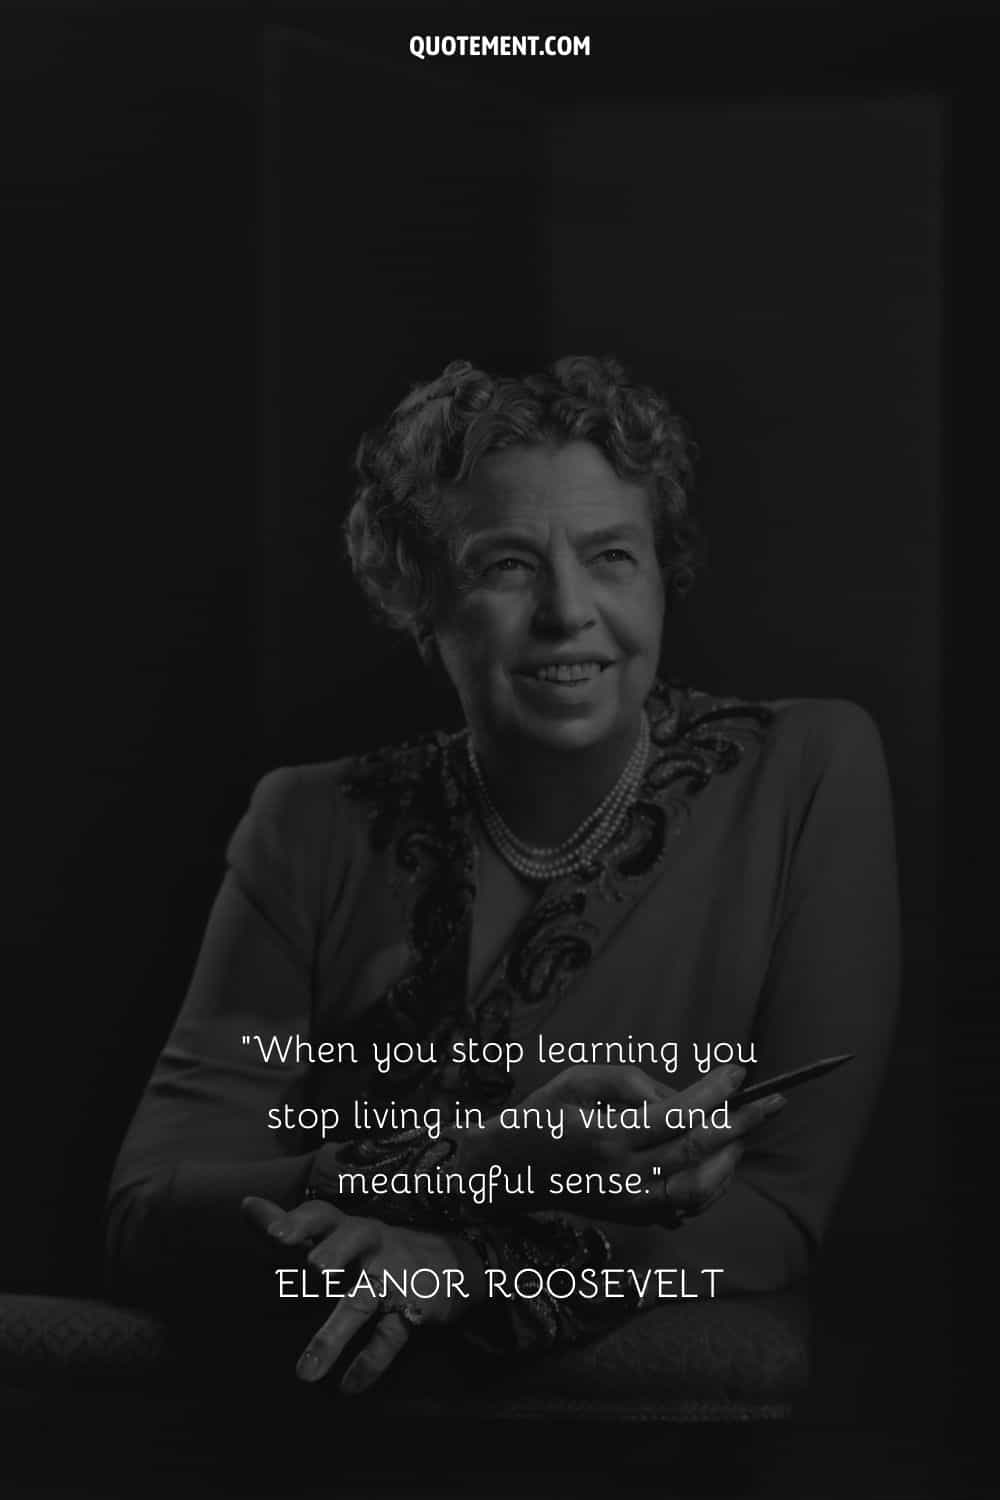 image of eleanor roosevelt with a quote about purpose